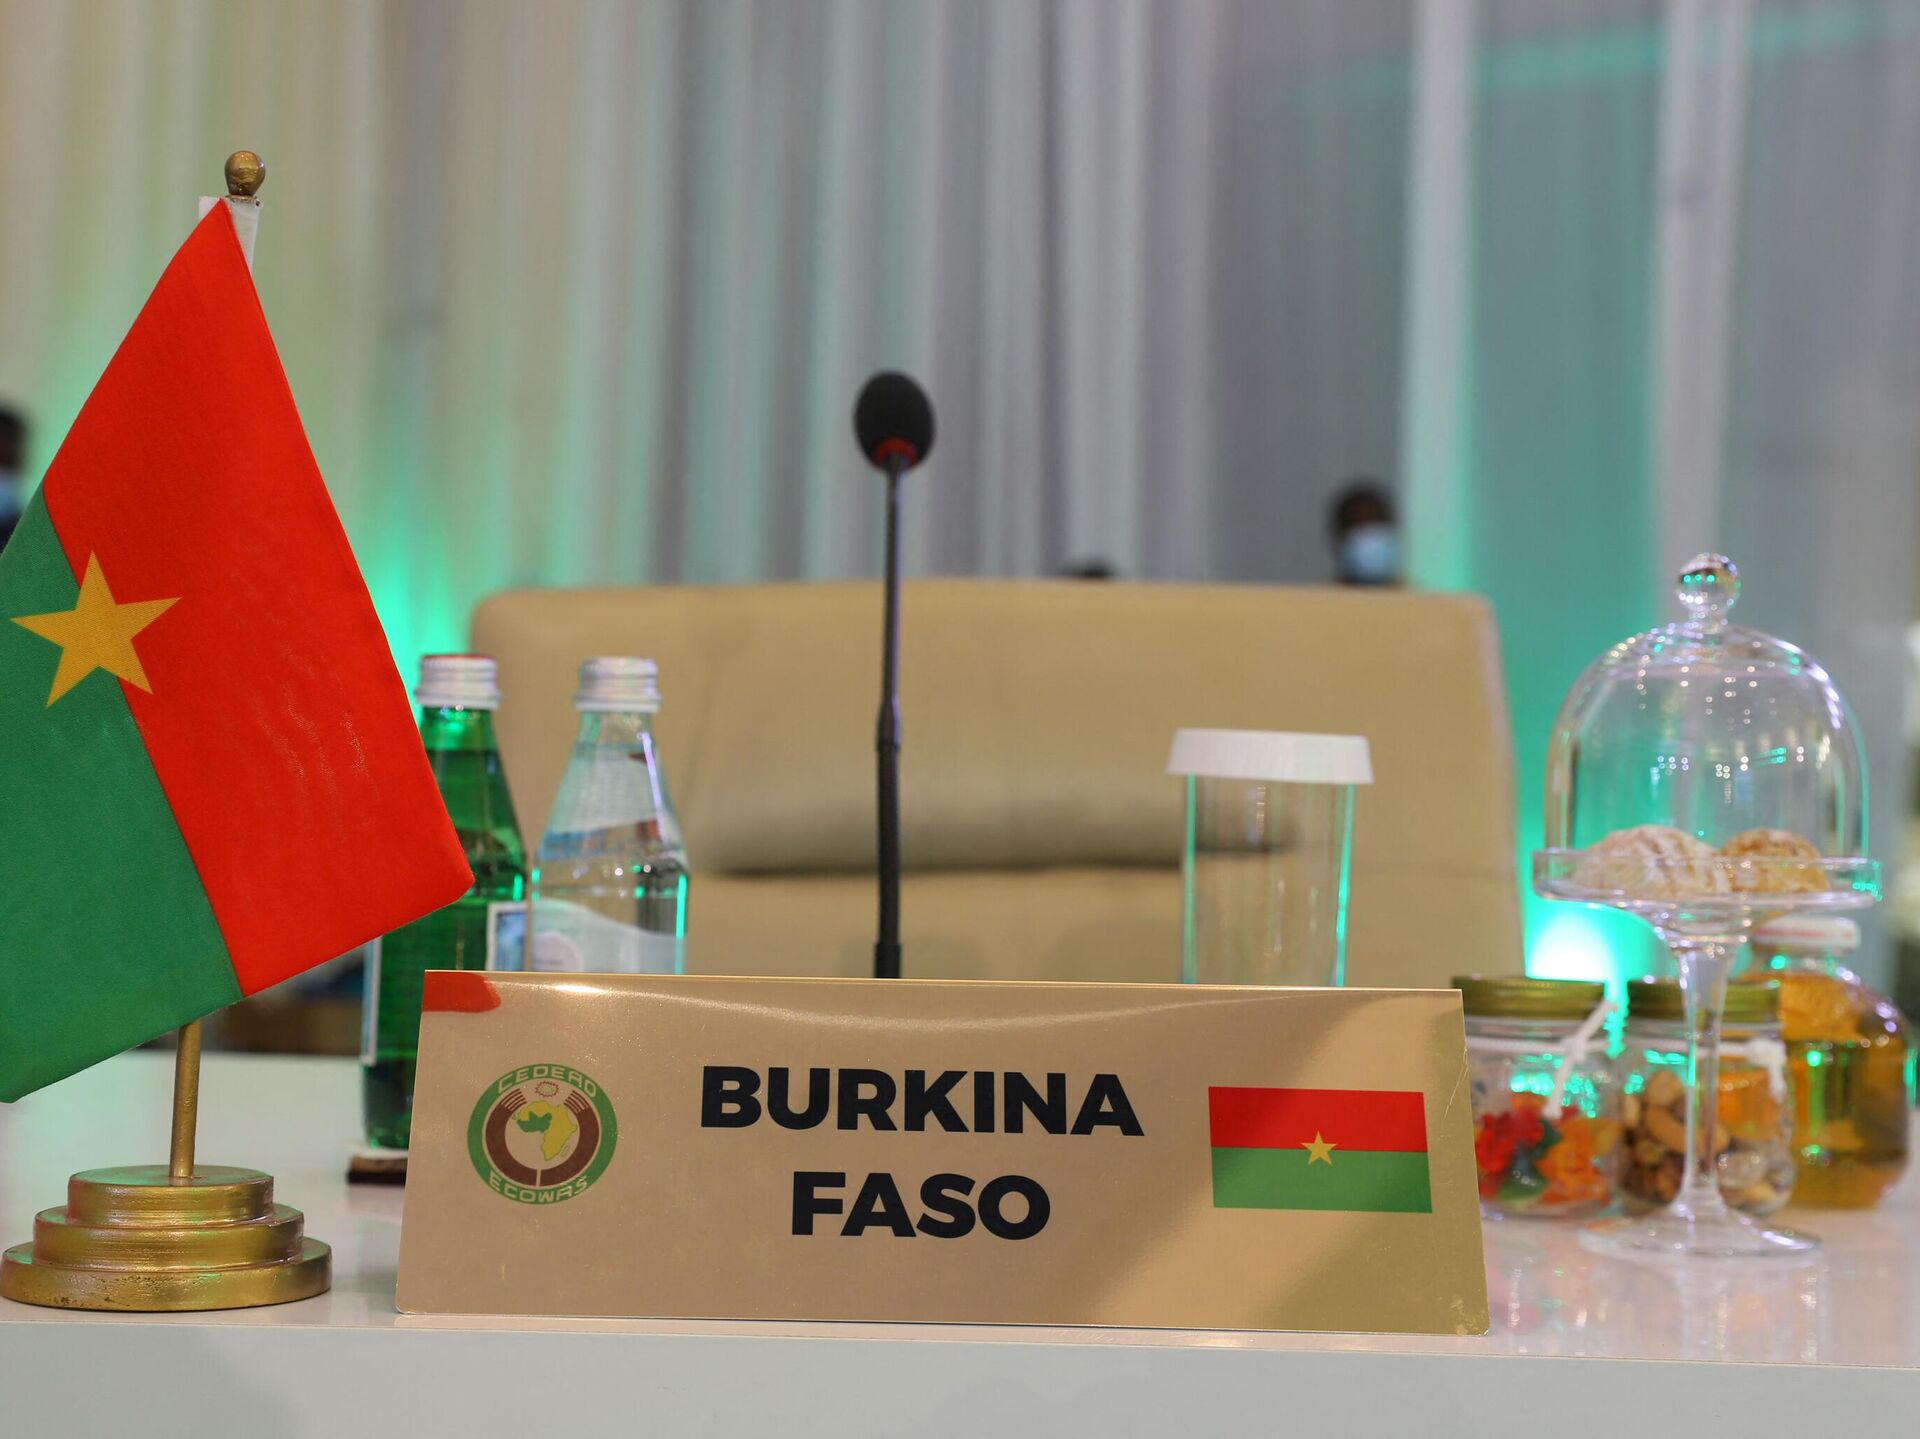 Burkina Faso re-establishes ties with North Korea, purchase of military equipment in sight